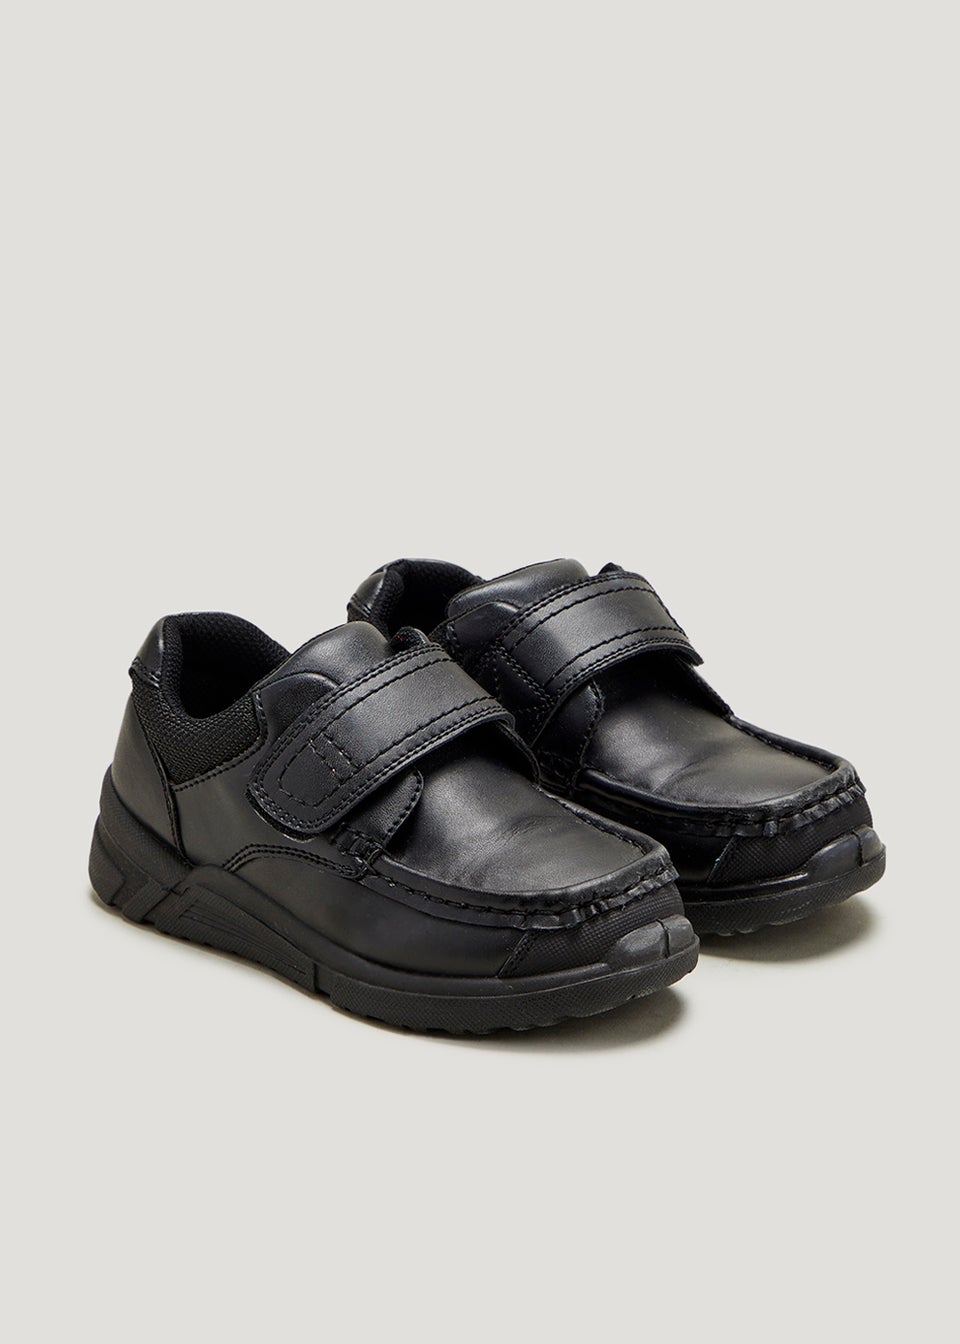 Boys Black Chunky Coated Leather School Trainers (Younger 7-Older 4)